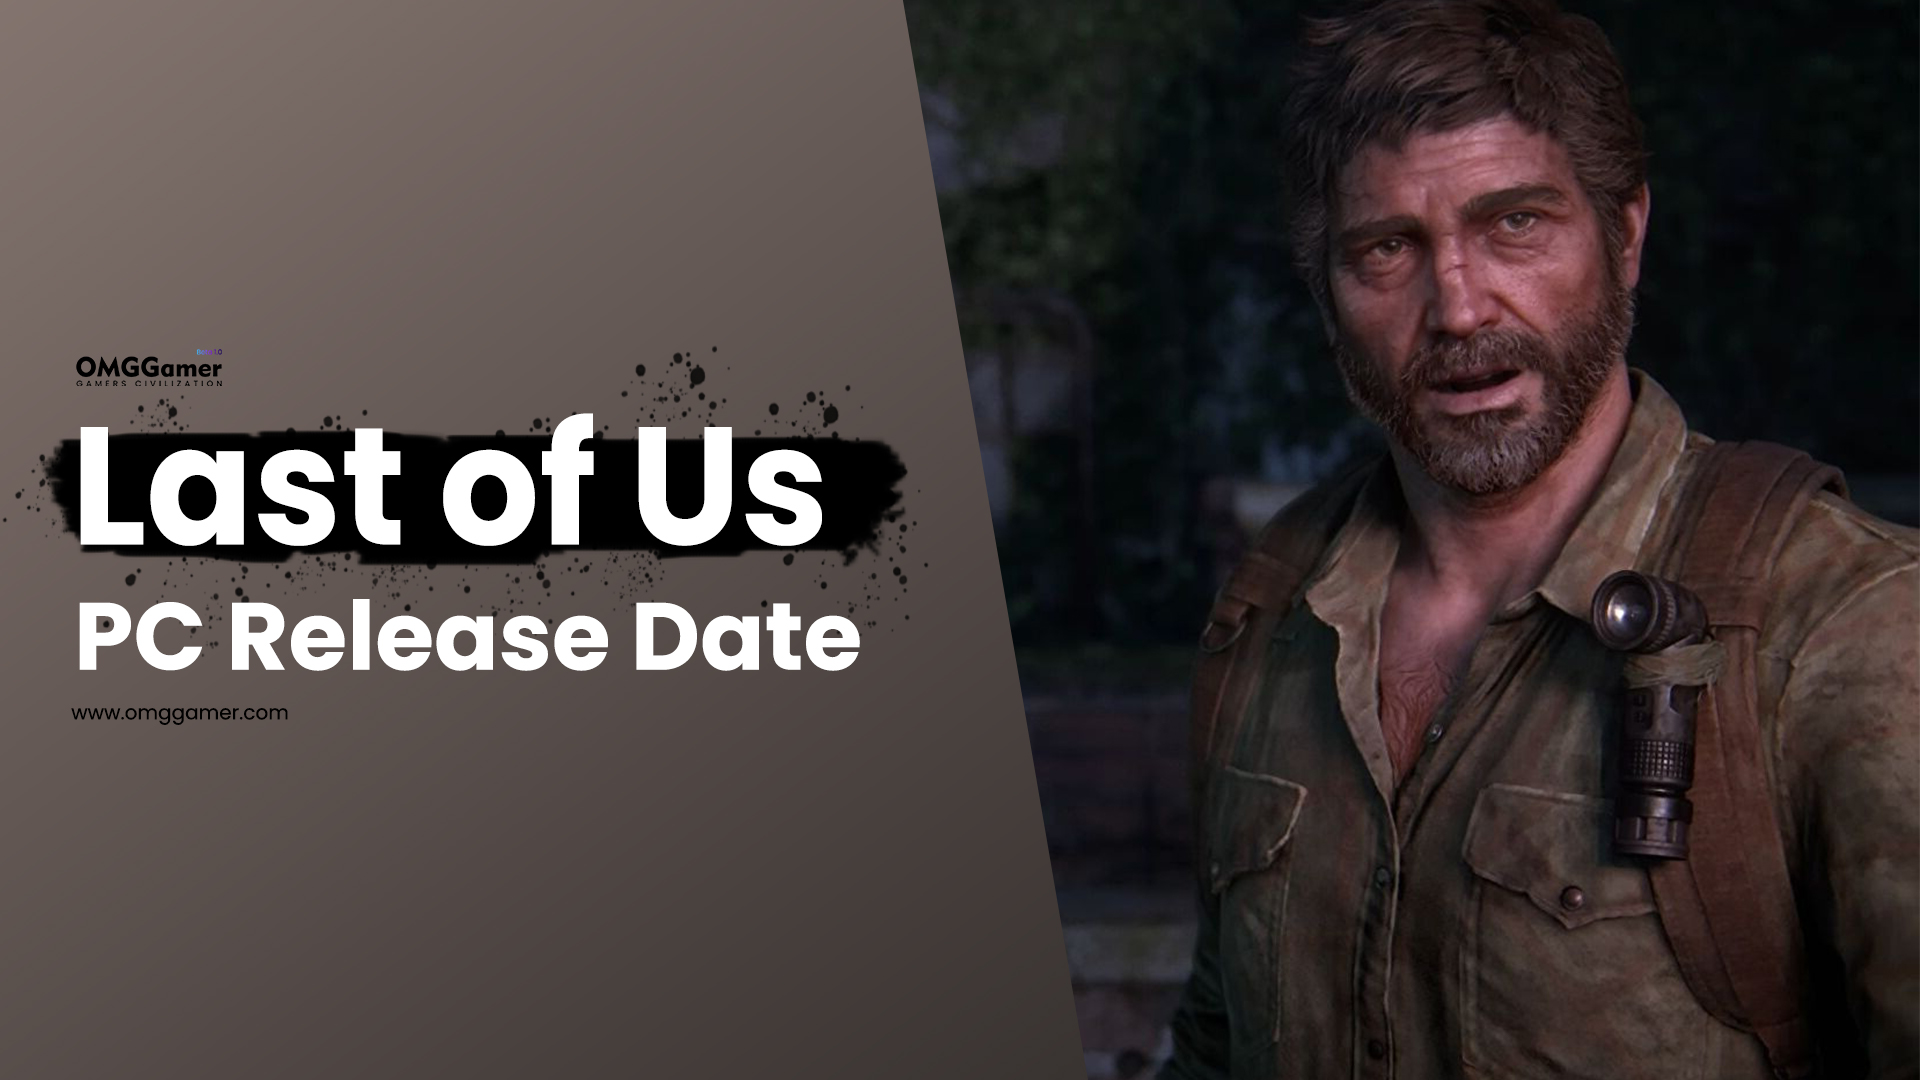 Last of Us PC Release Date